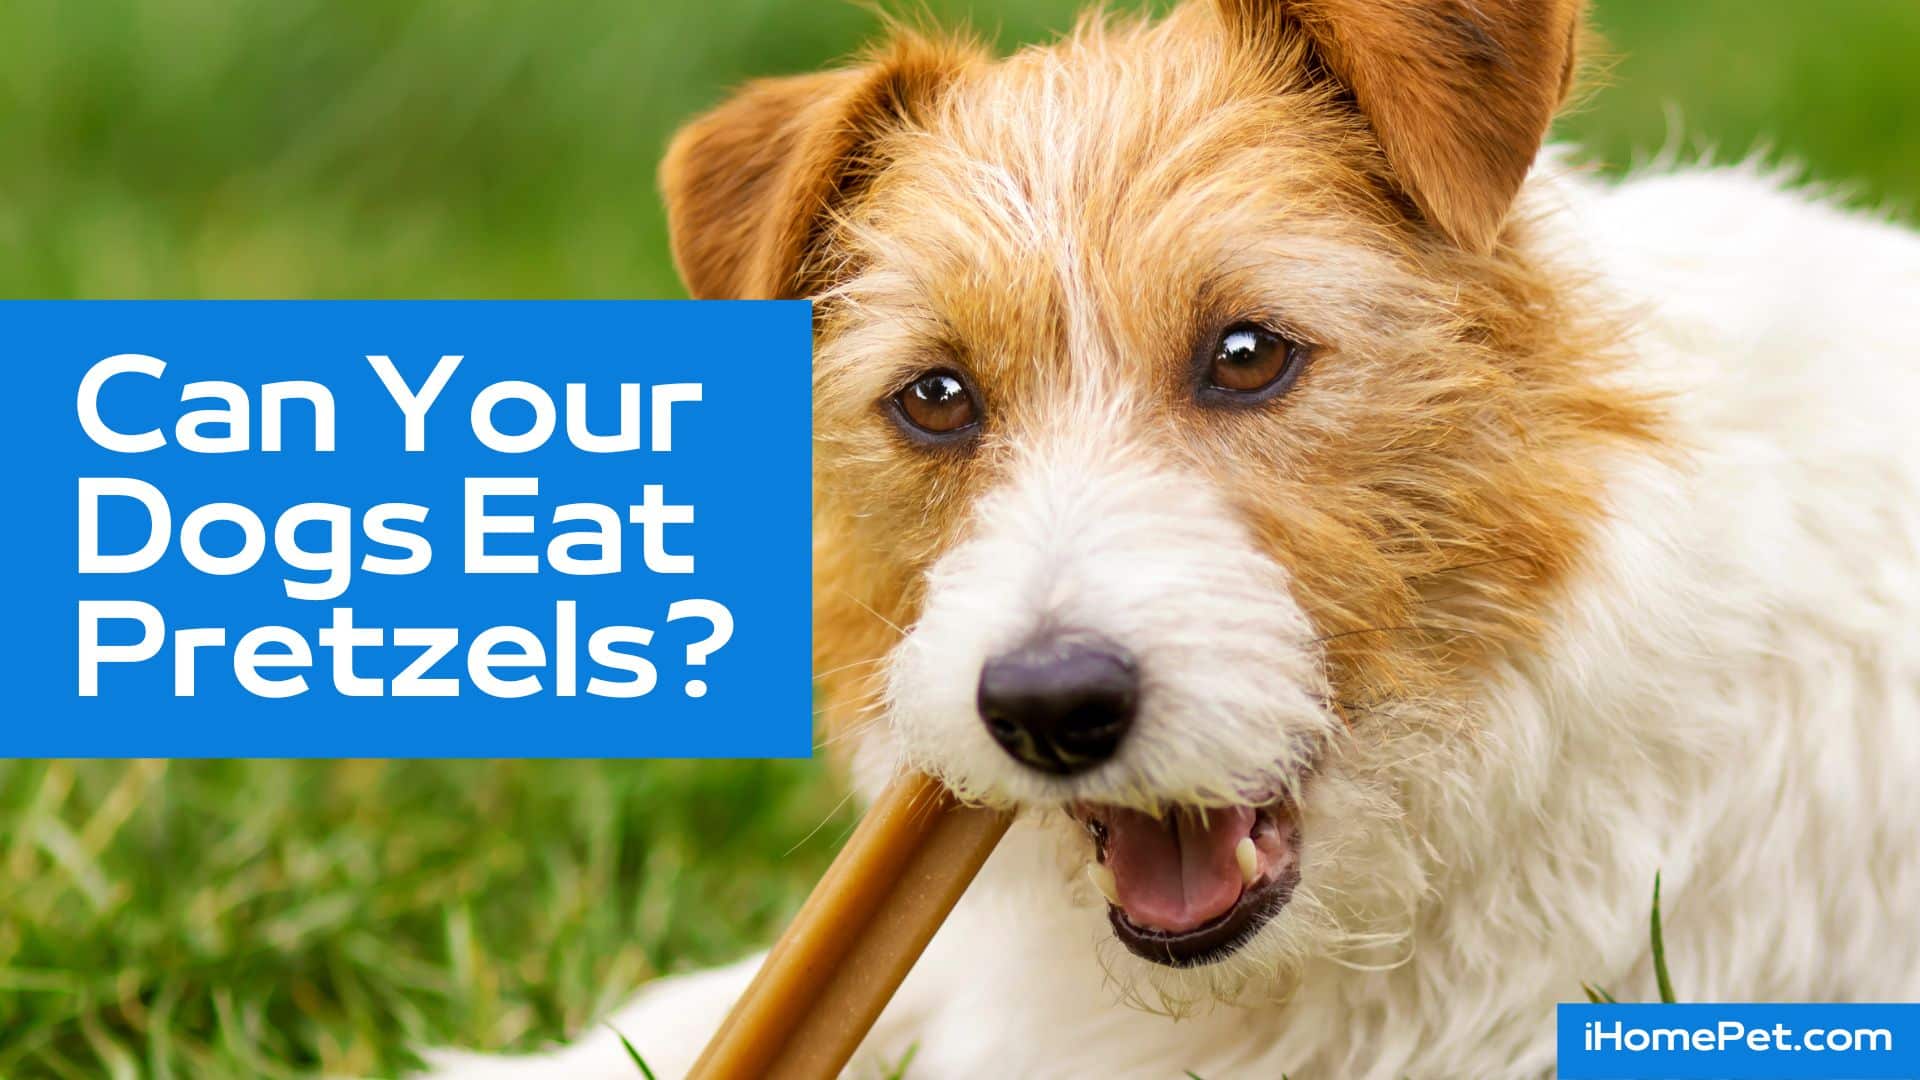 Salt poisoning affecting your dogs health because of pretzels and other foods